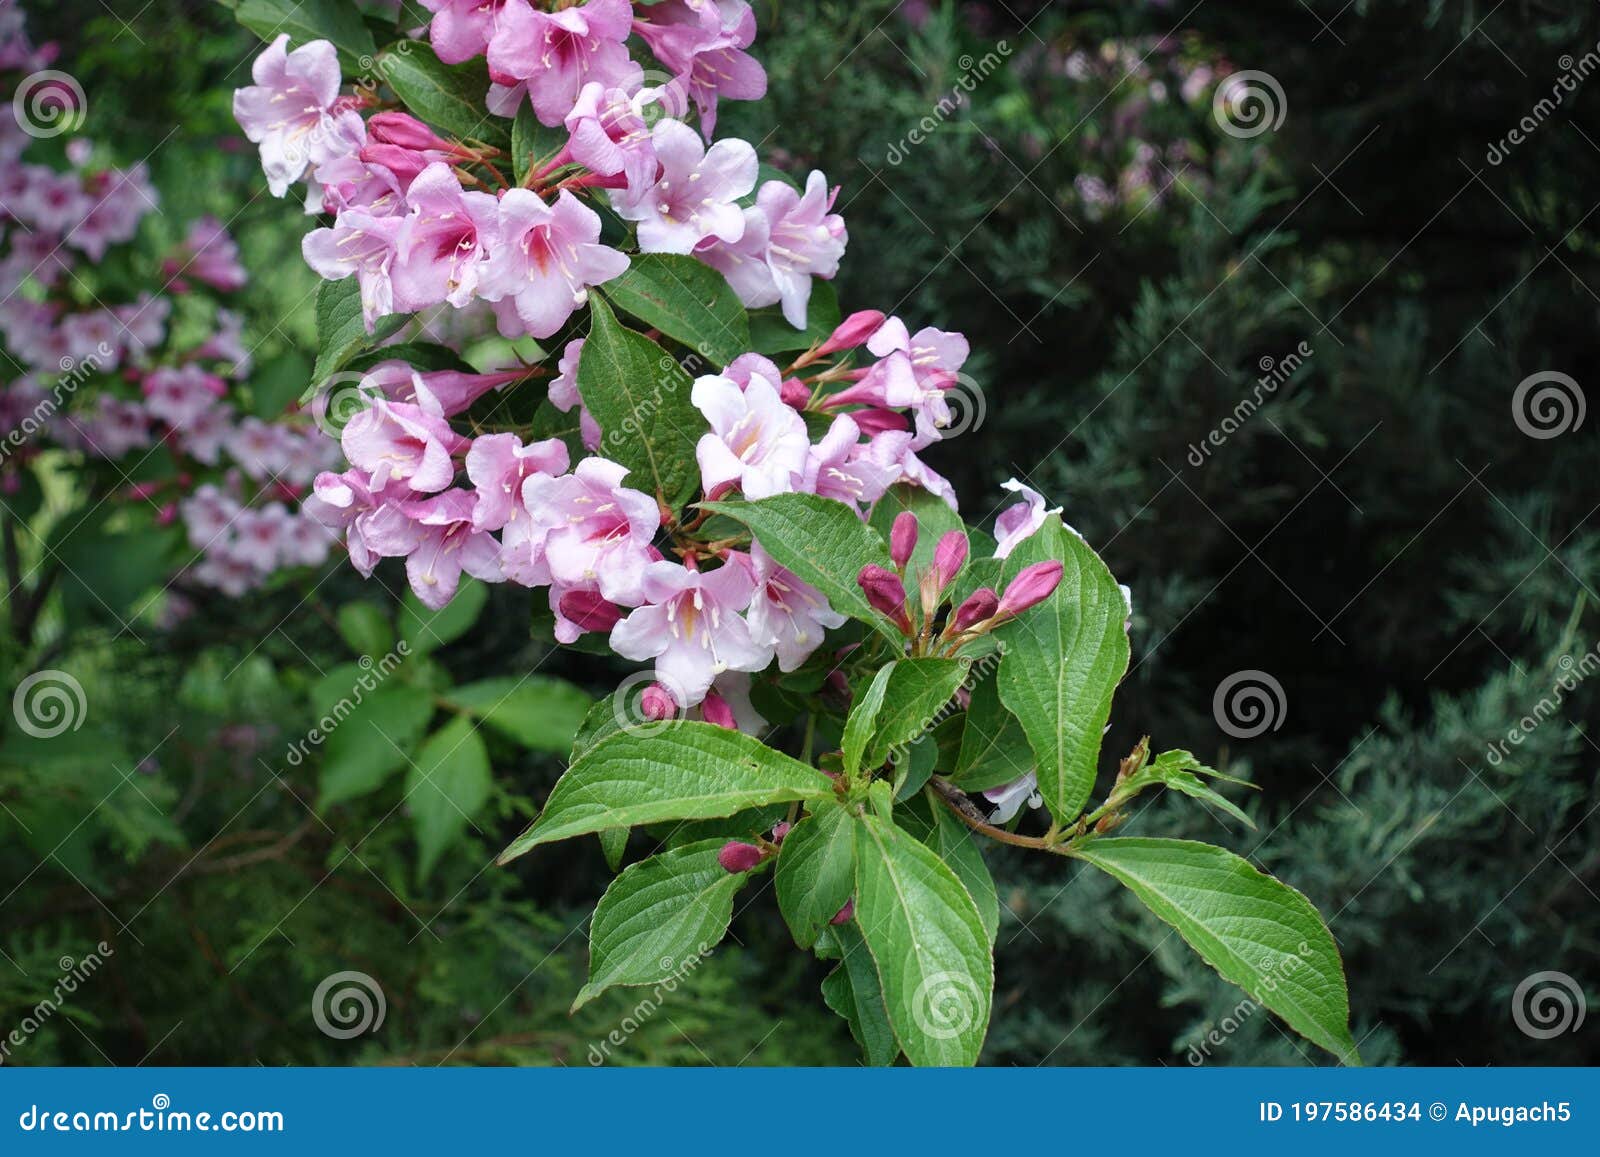 florescence of weigela florida in may